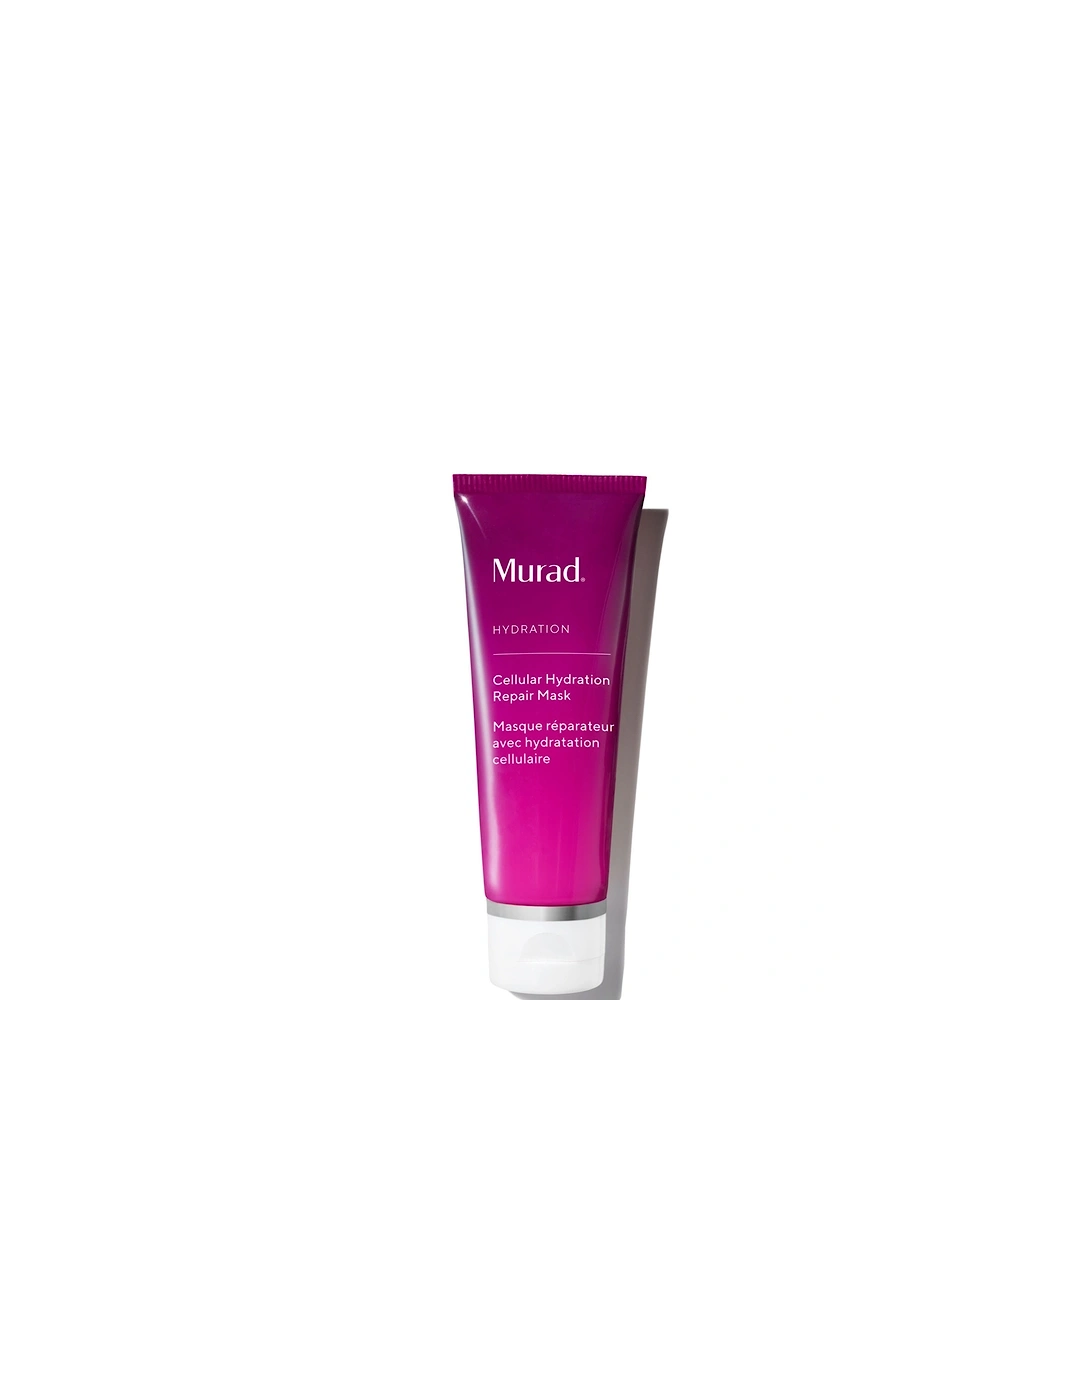 Cellular Hydration Barrier Repair Mask 77g, 2 of 1